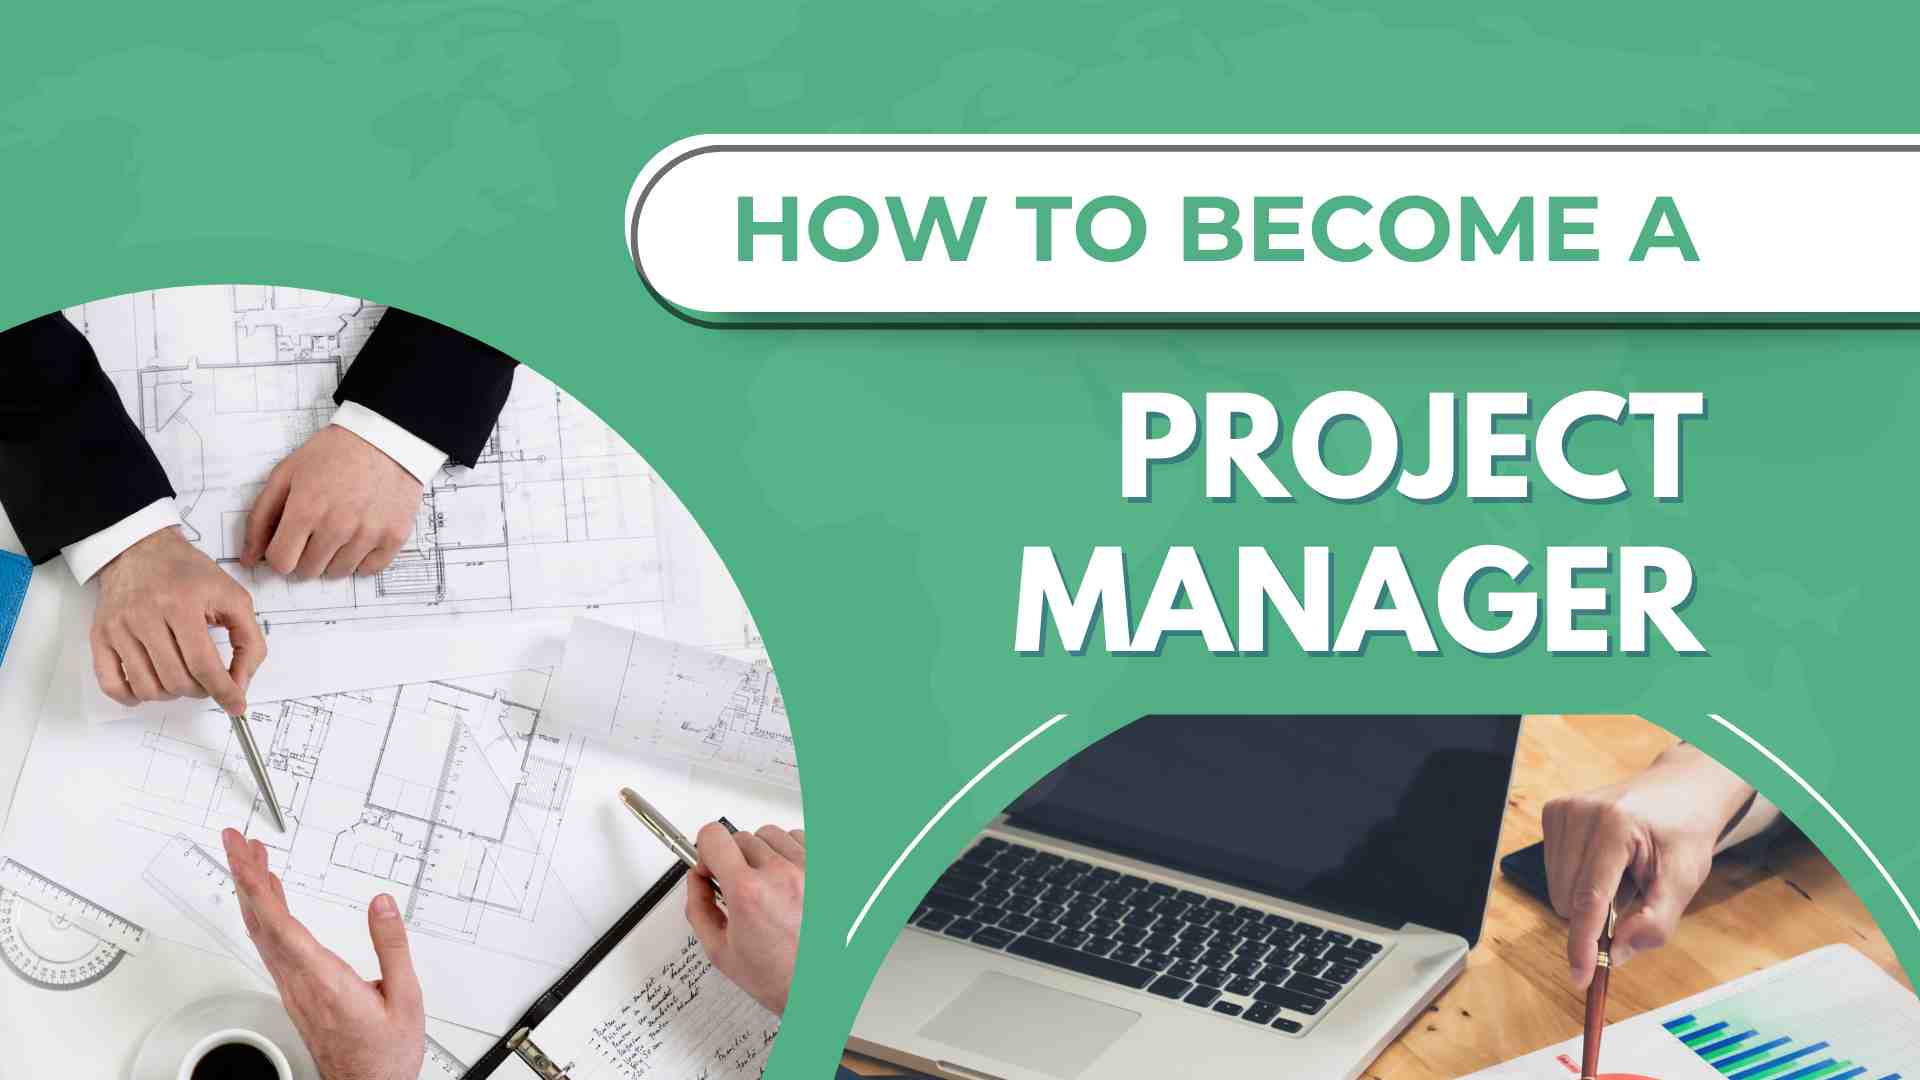 How to become a Project Manager